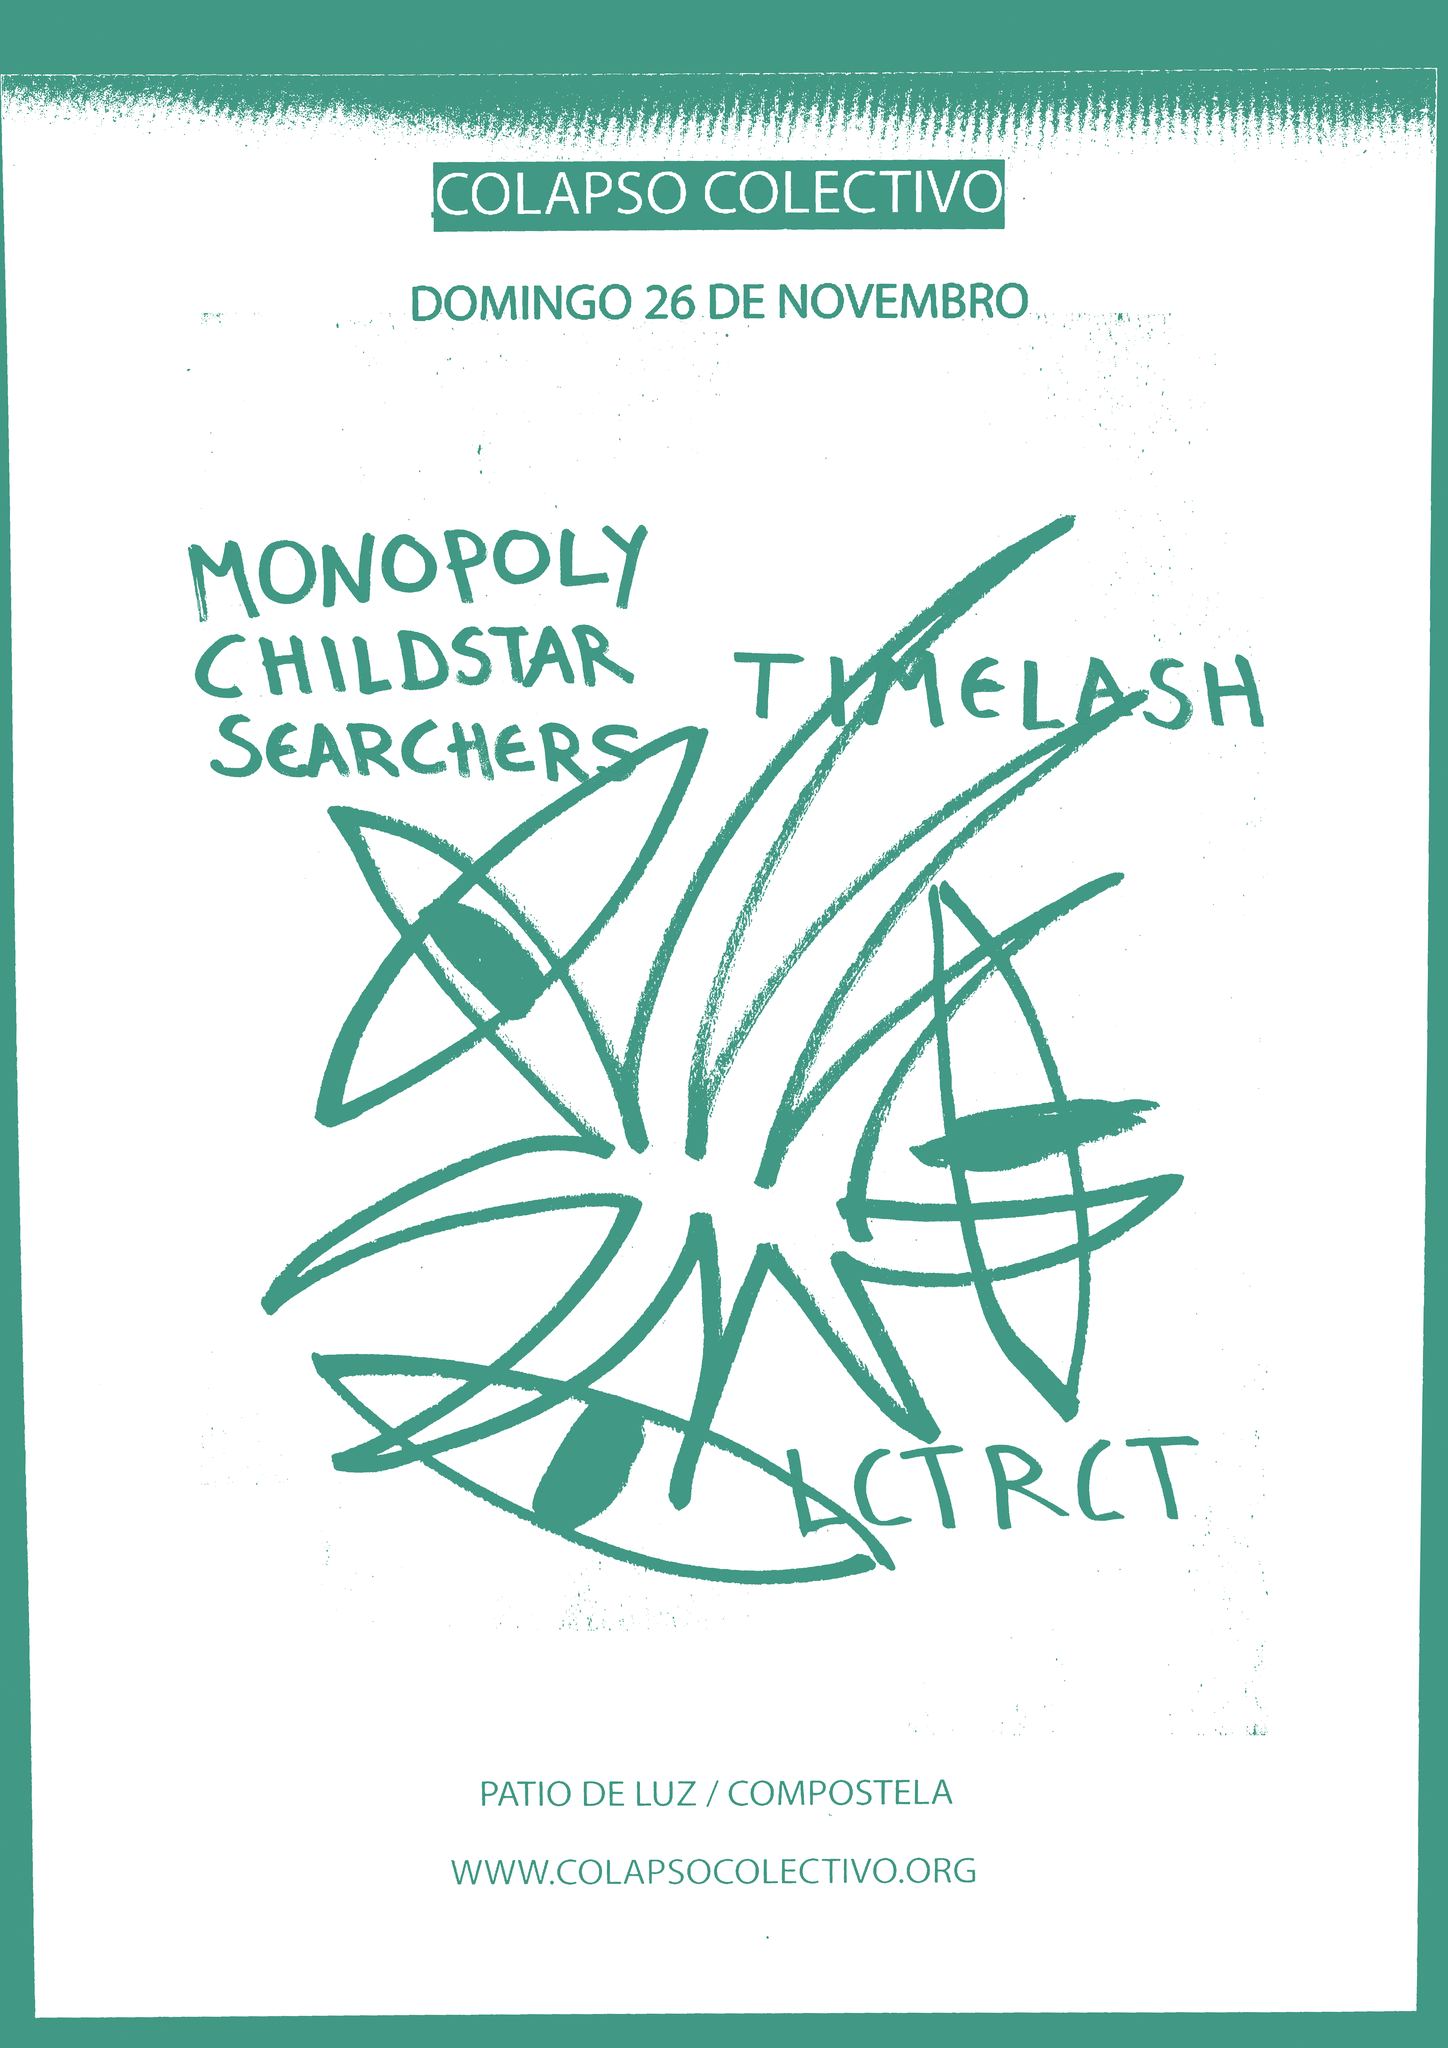 Colapso Colectivo: MONOPOLY CHILD STAR SEARCHERS / TIMELASH / LCTRCT